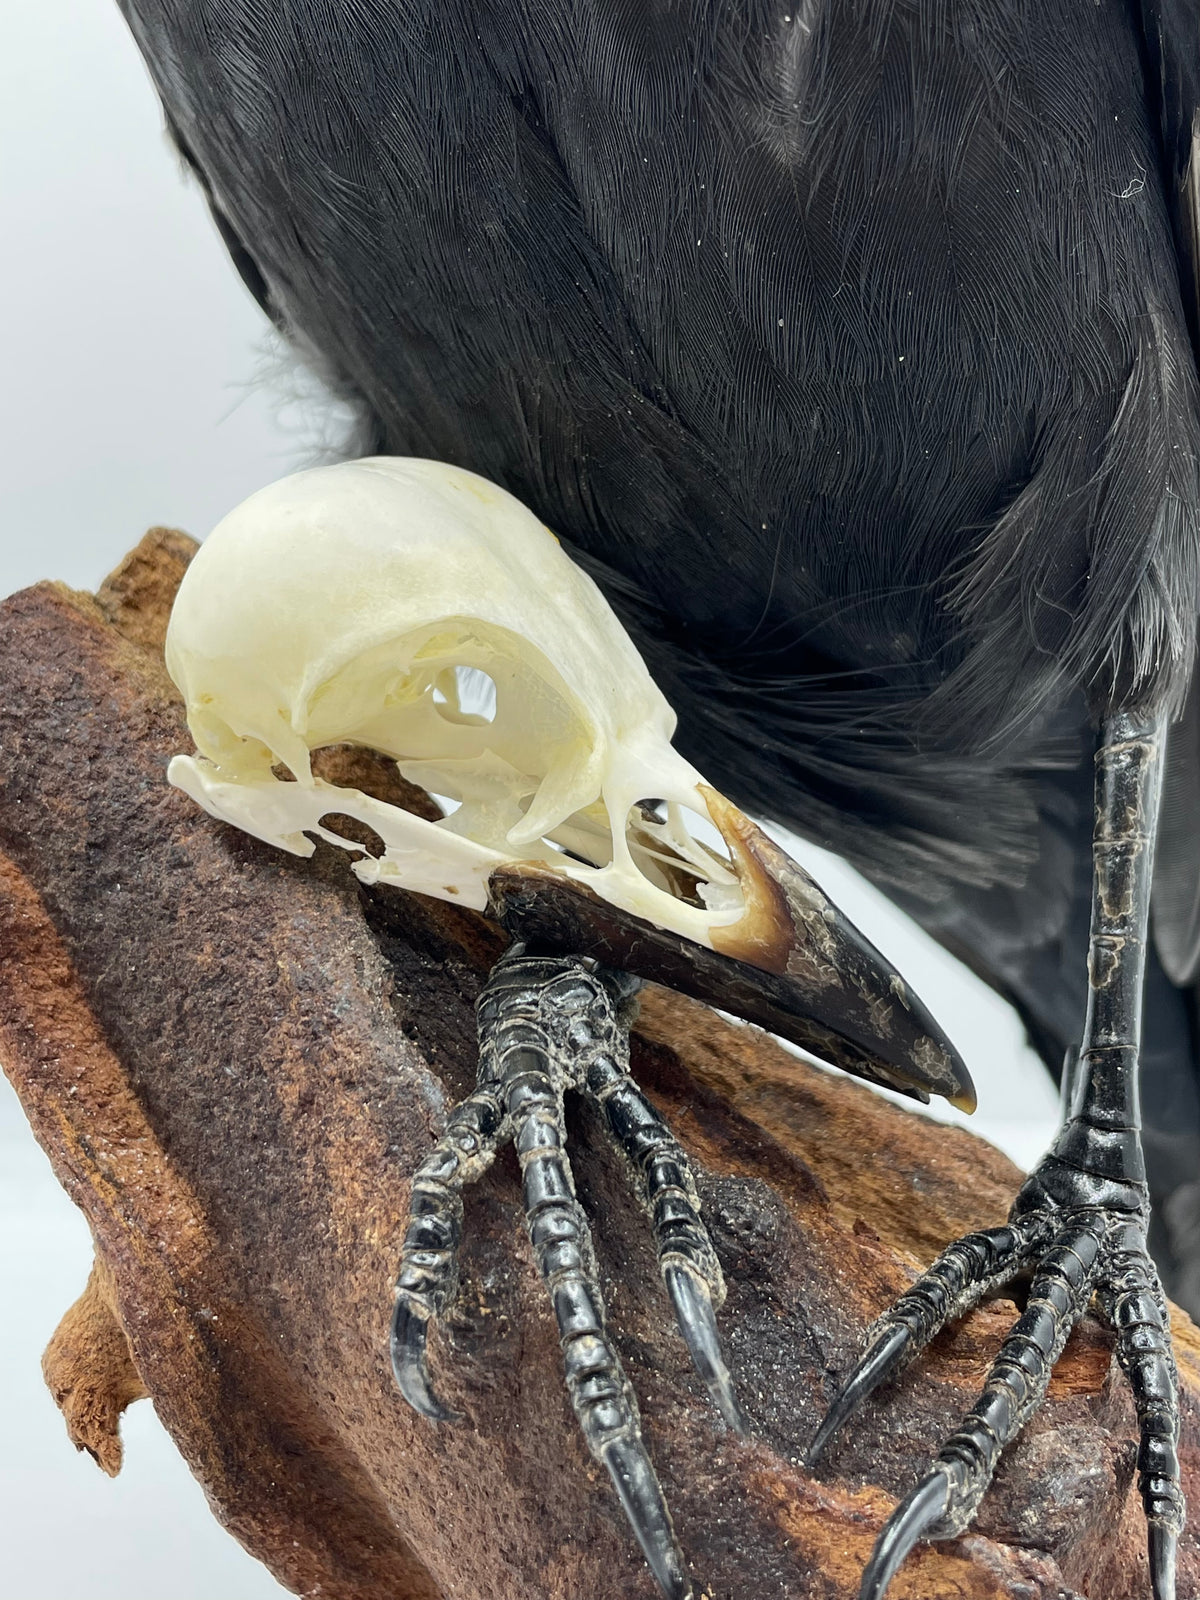 Crow / Pica Pica / Eurasian Magpie Skull